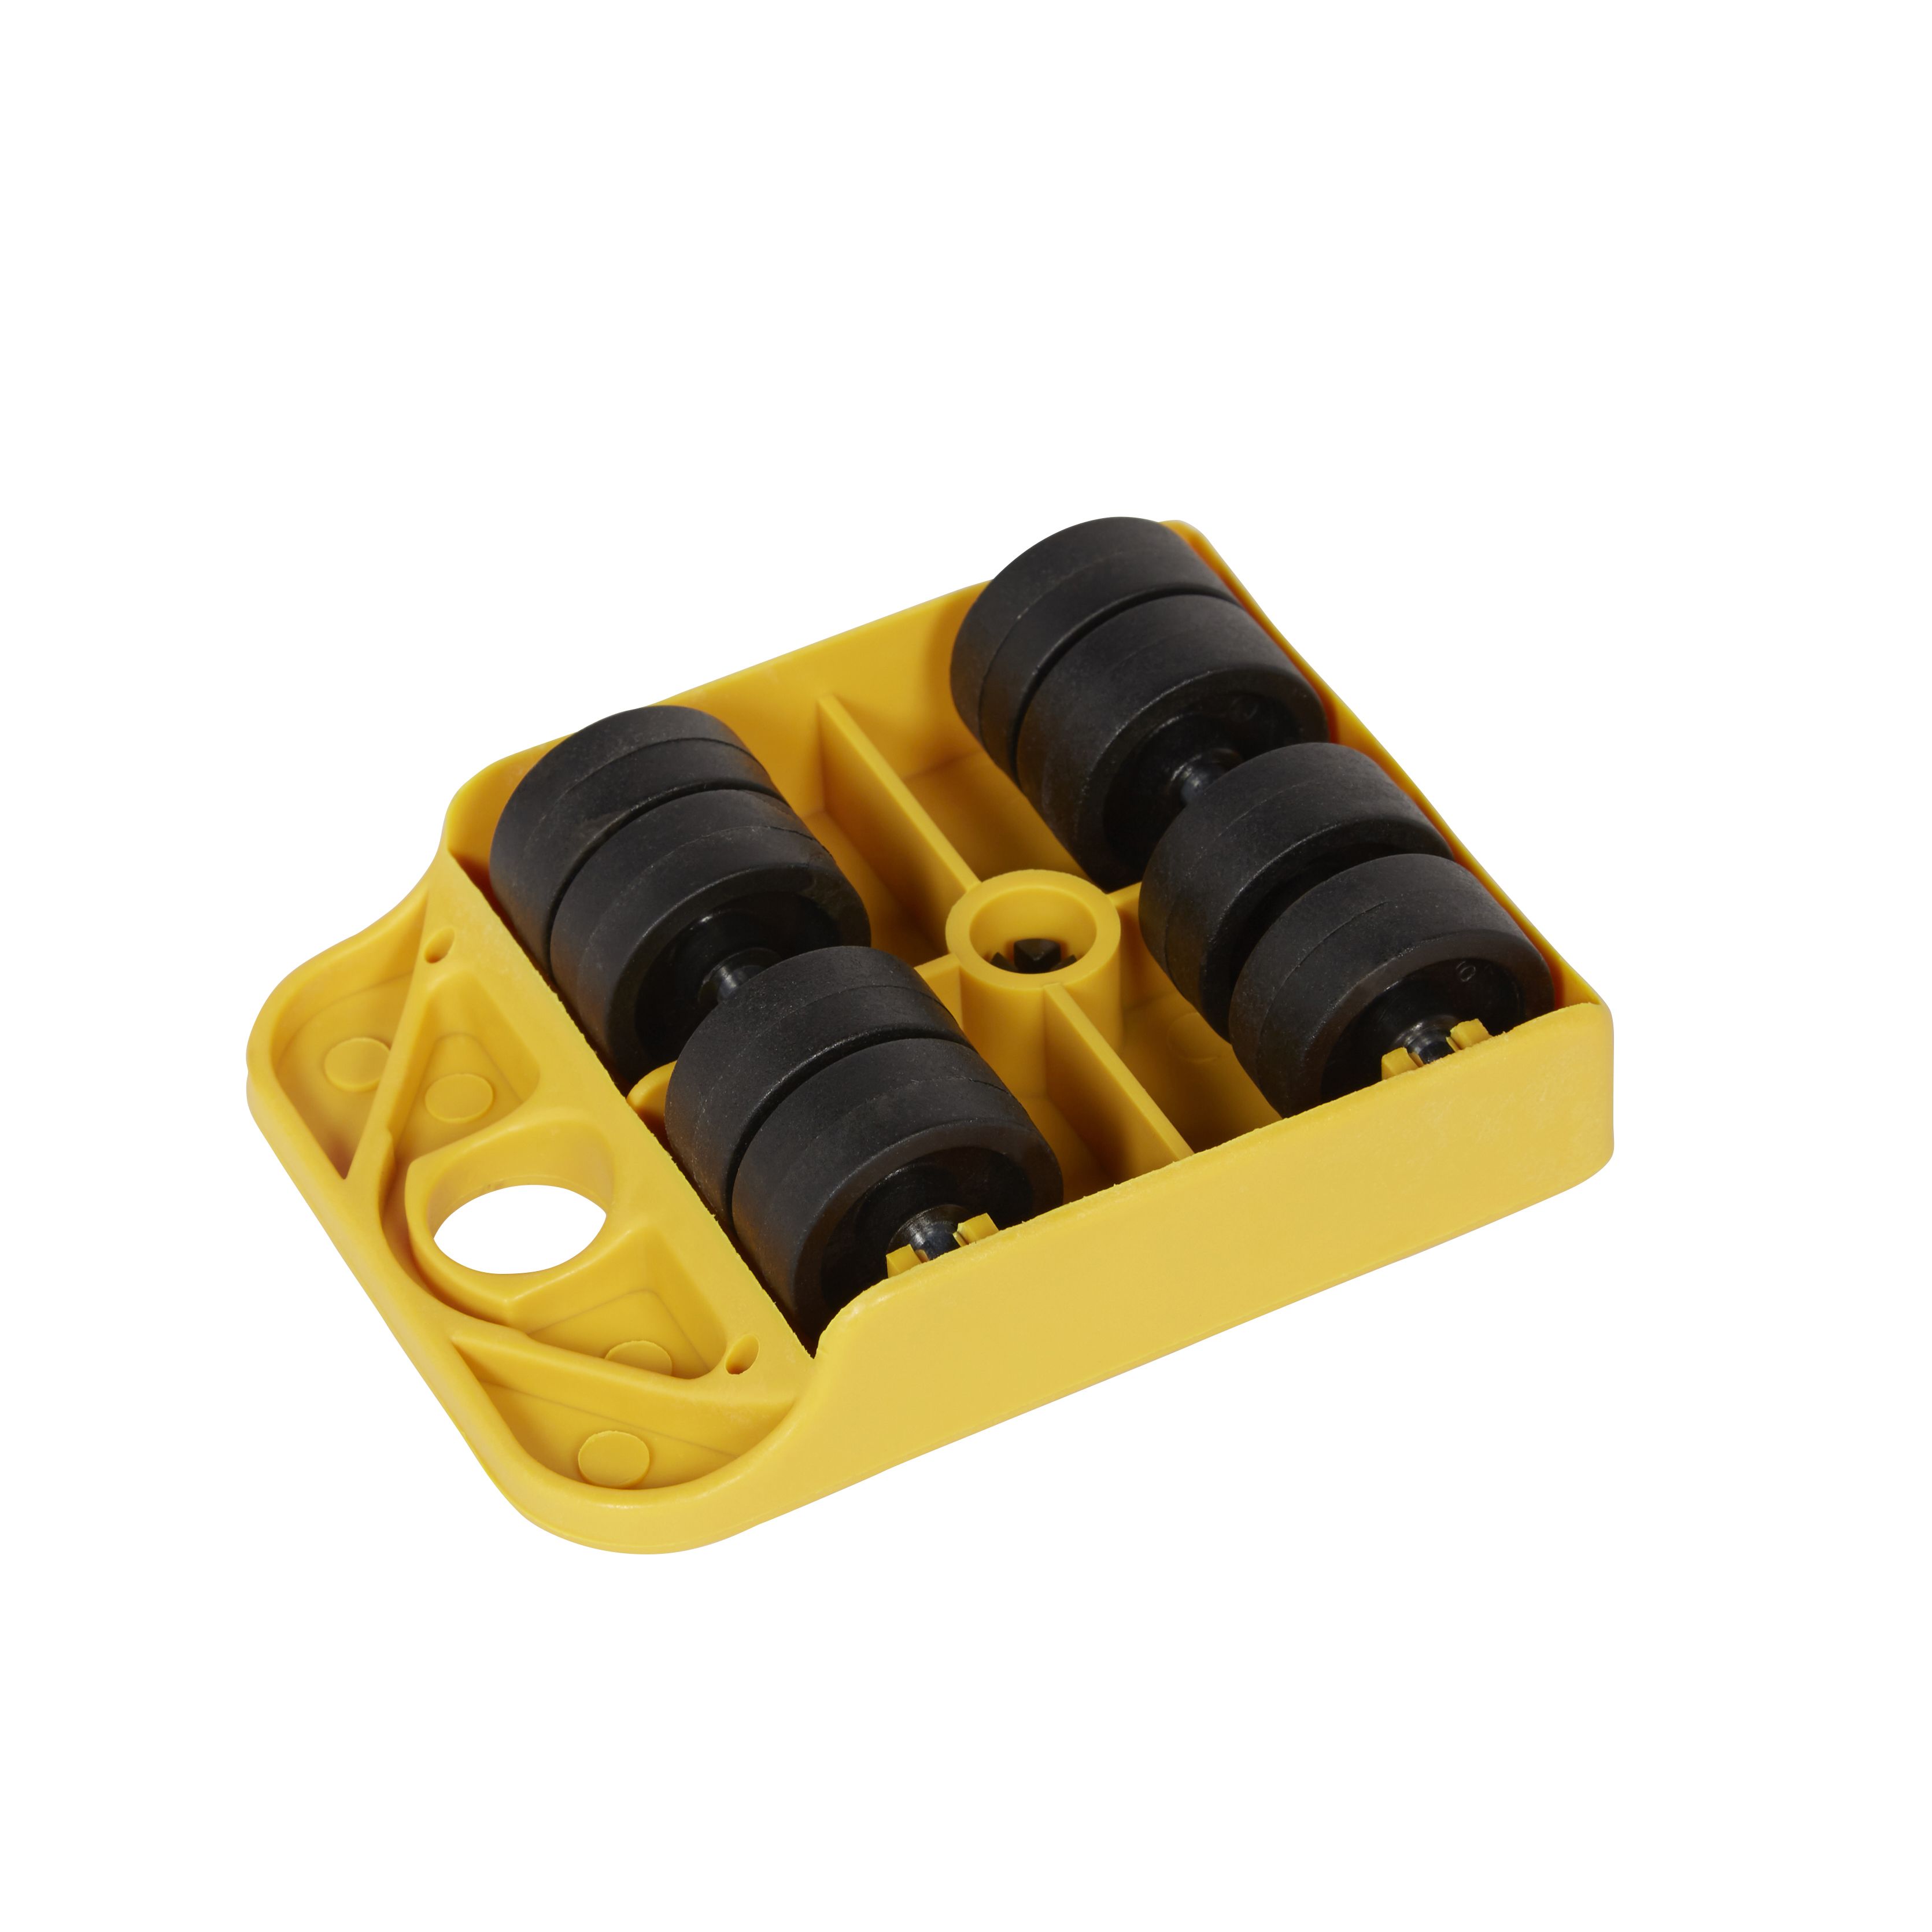 Diall Plastic Dolly, 150kg capacity TR28